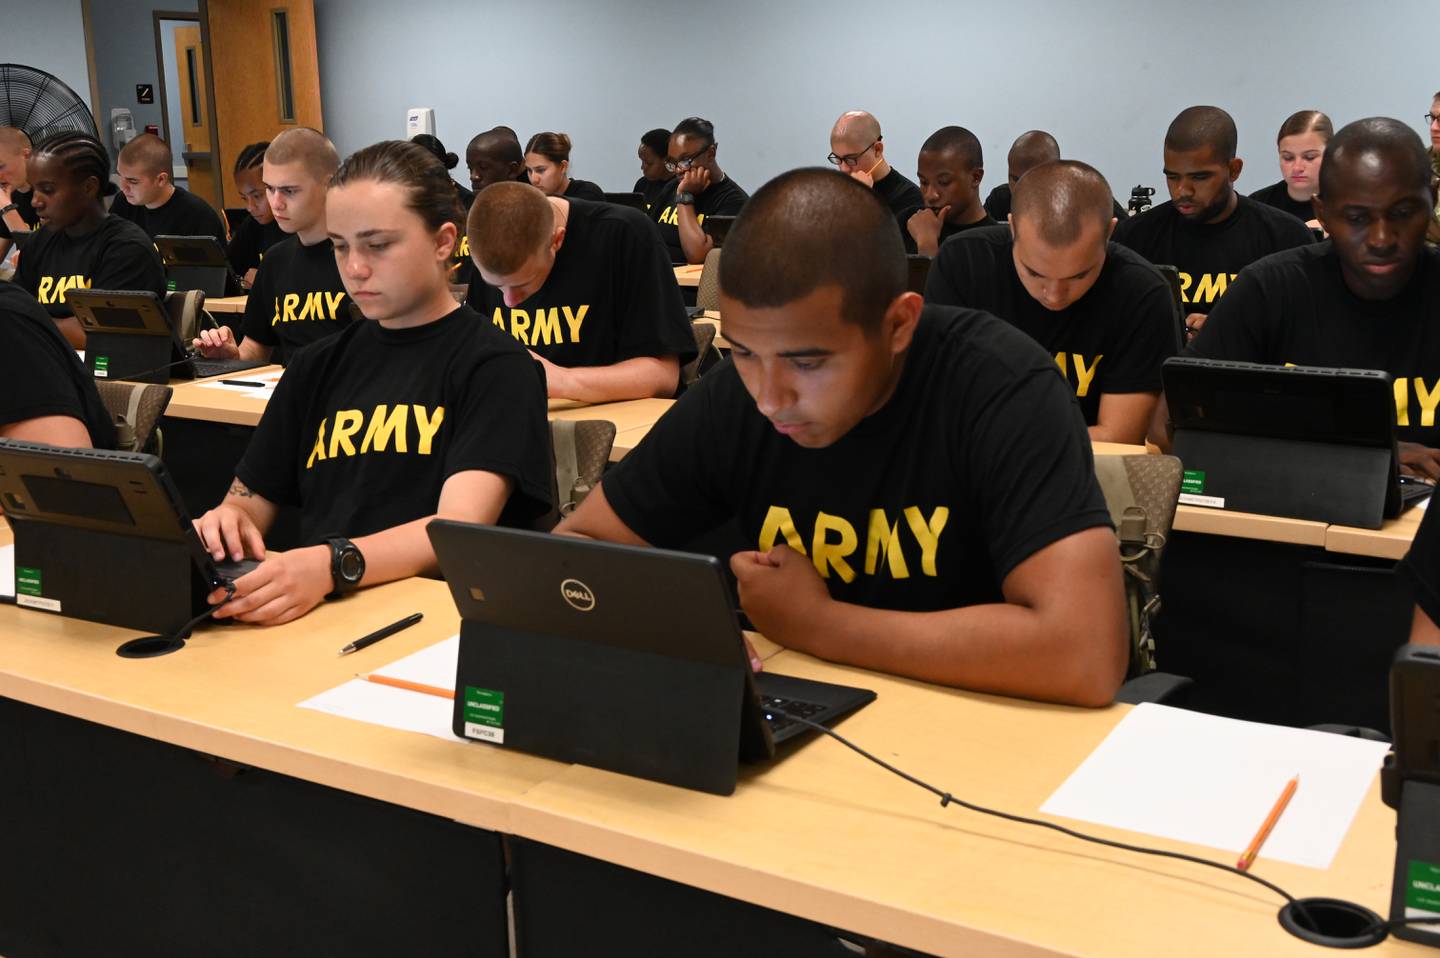 The Army started a Future Soldier Preparatory Course pilot program at Fort Jackson, S.C. to help America’s youth overcome academic and physical fitness barriers to service so they can earn the opportunity to join the Army.